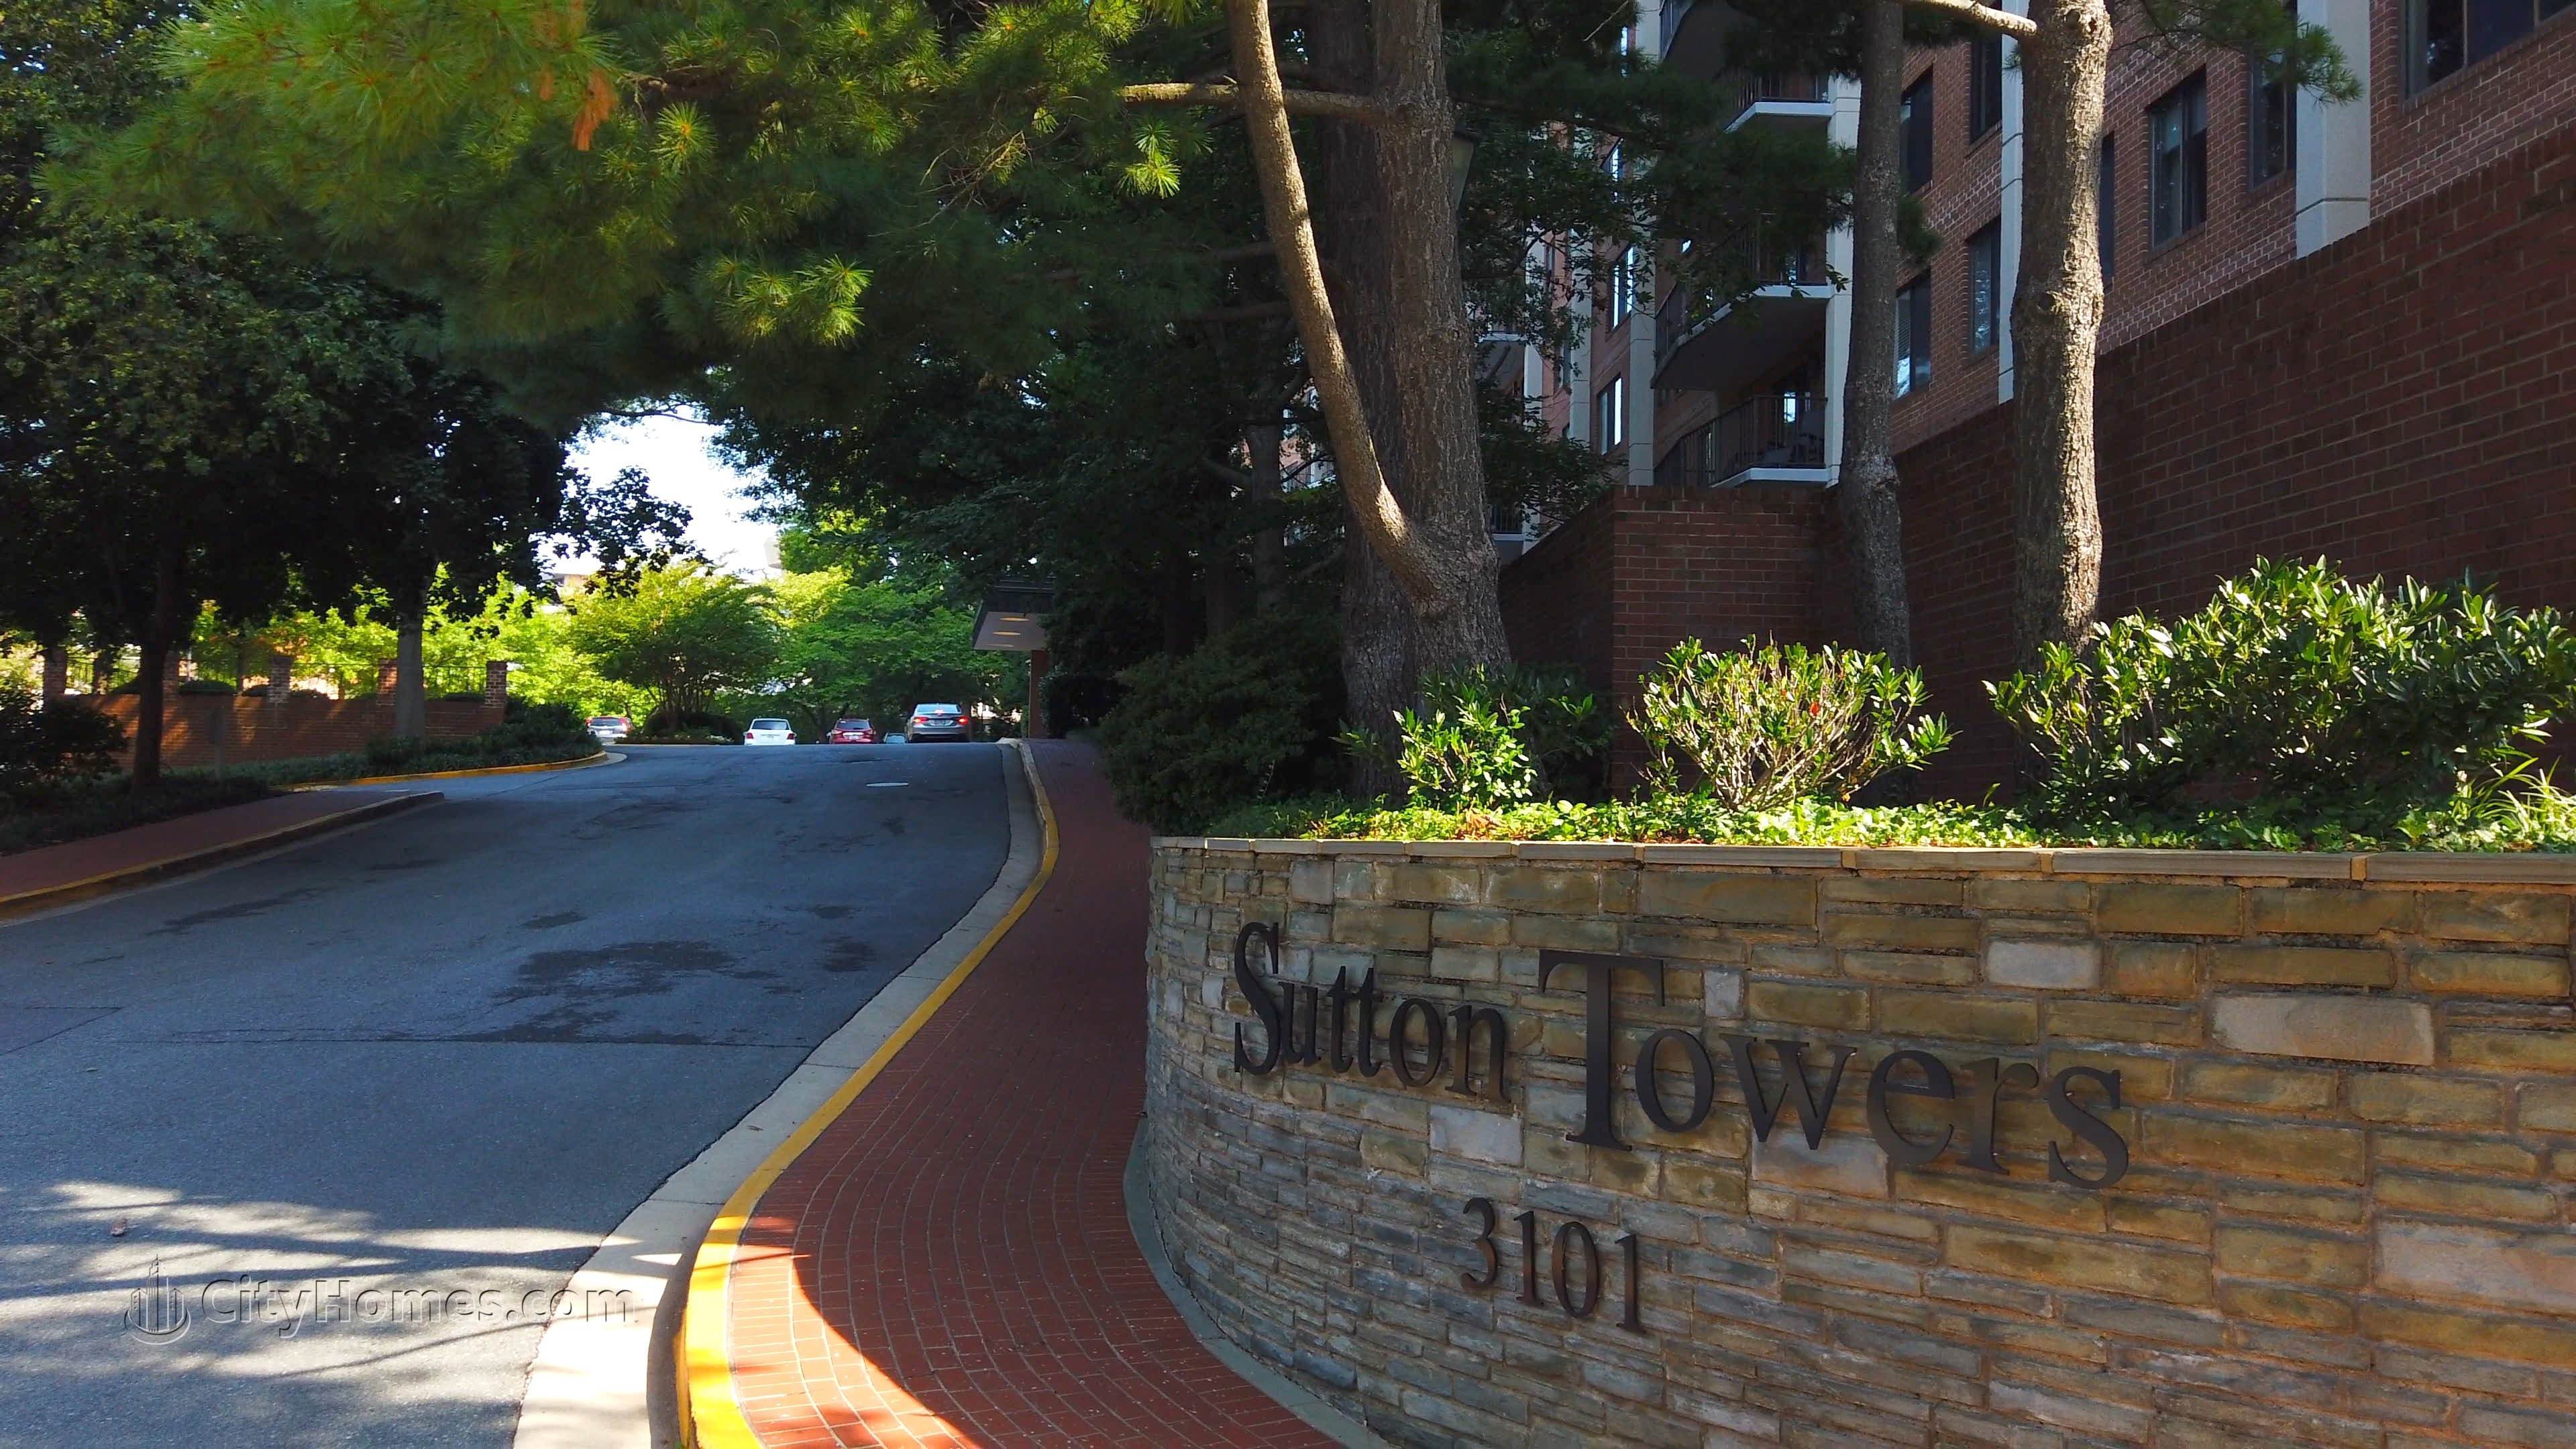 3101 New Mexico Ave NW, Wesley Heights, Washington, DC 20016에 Sutton Towers 건물